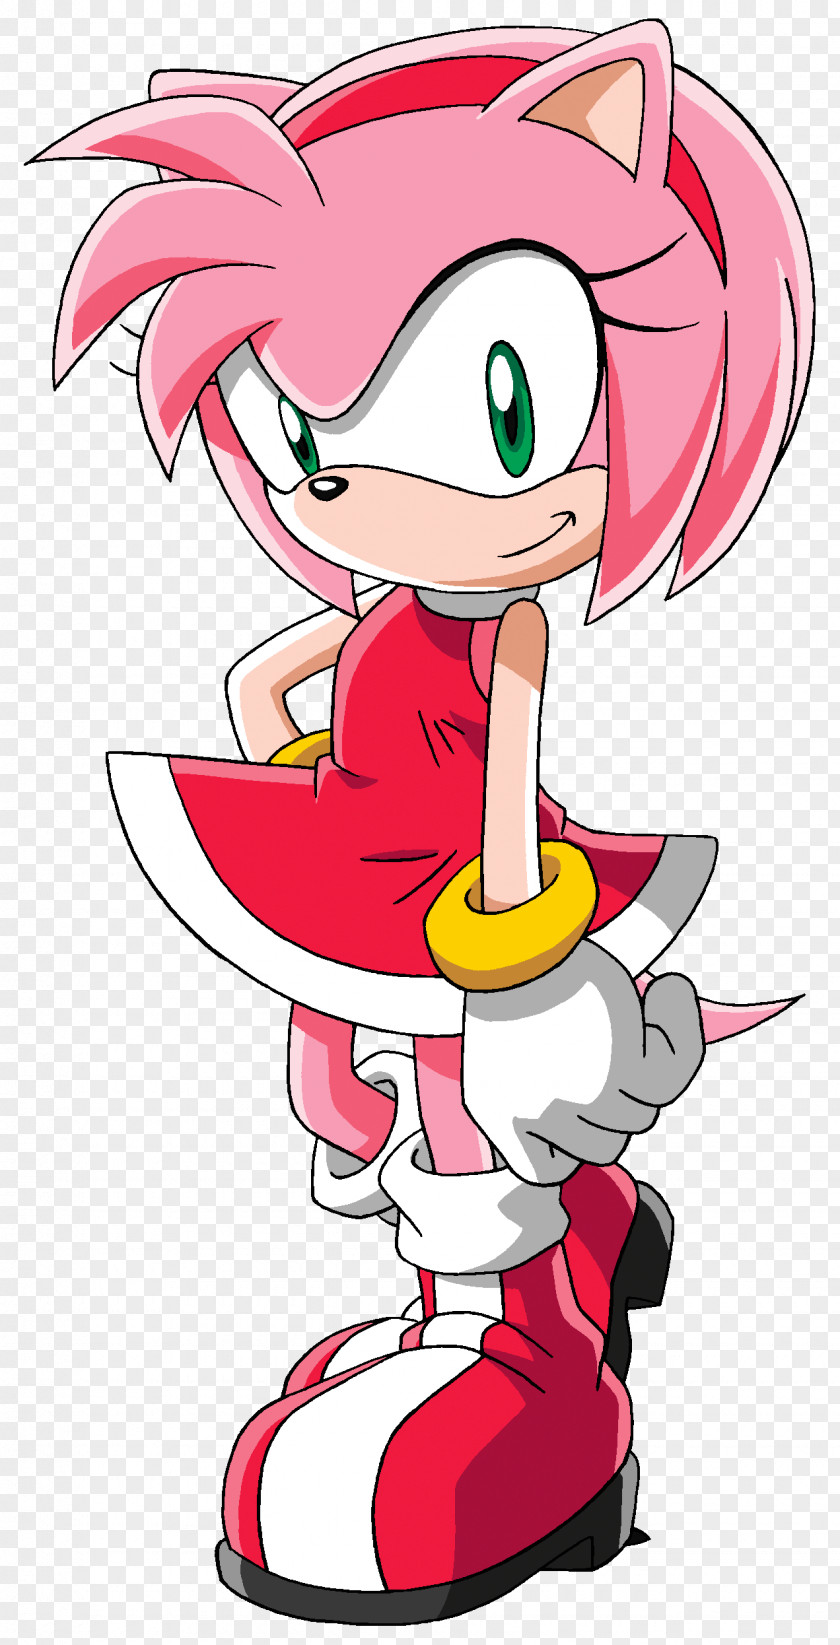 Sonic Amy Rose Cream The Rabbit Doctor Eggman & Knuckles Rouge Bat PNG